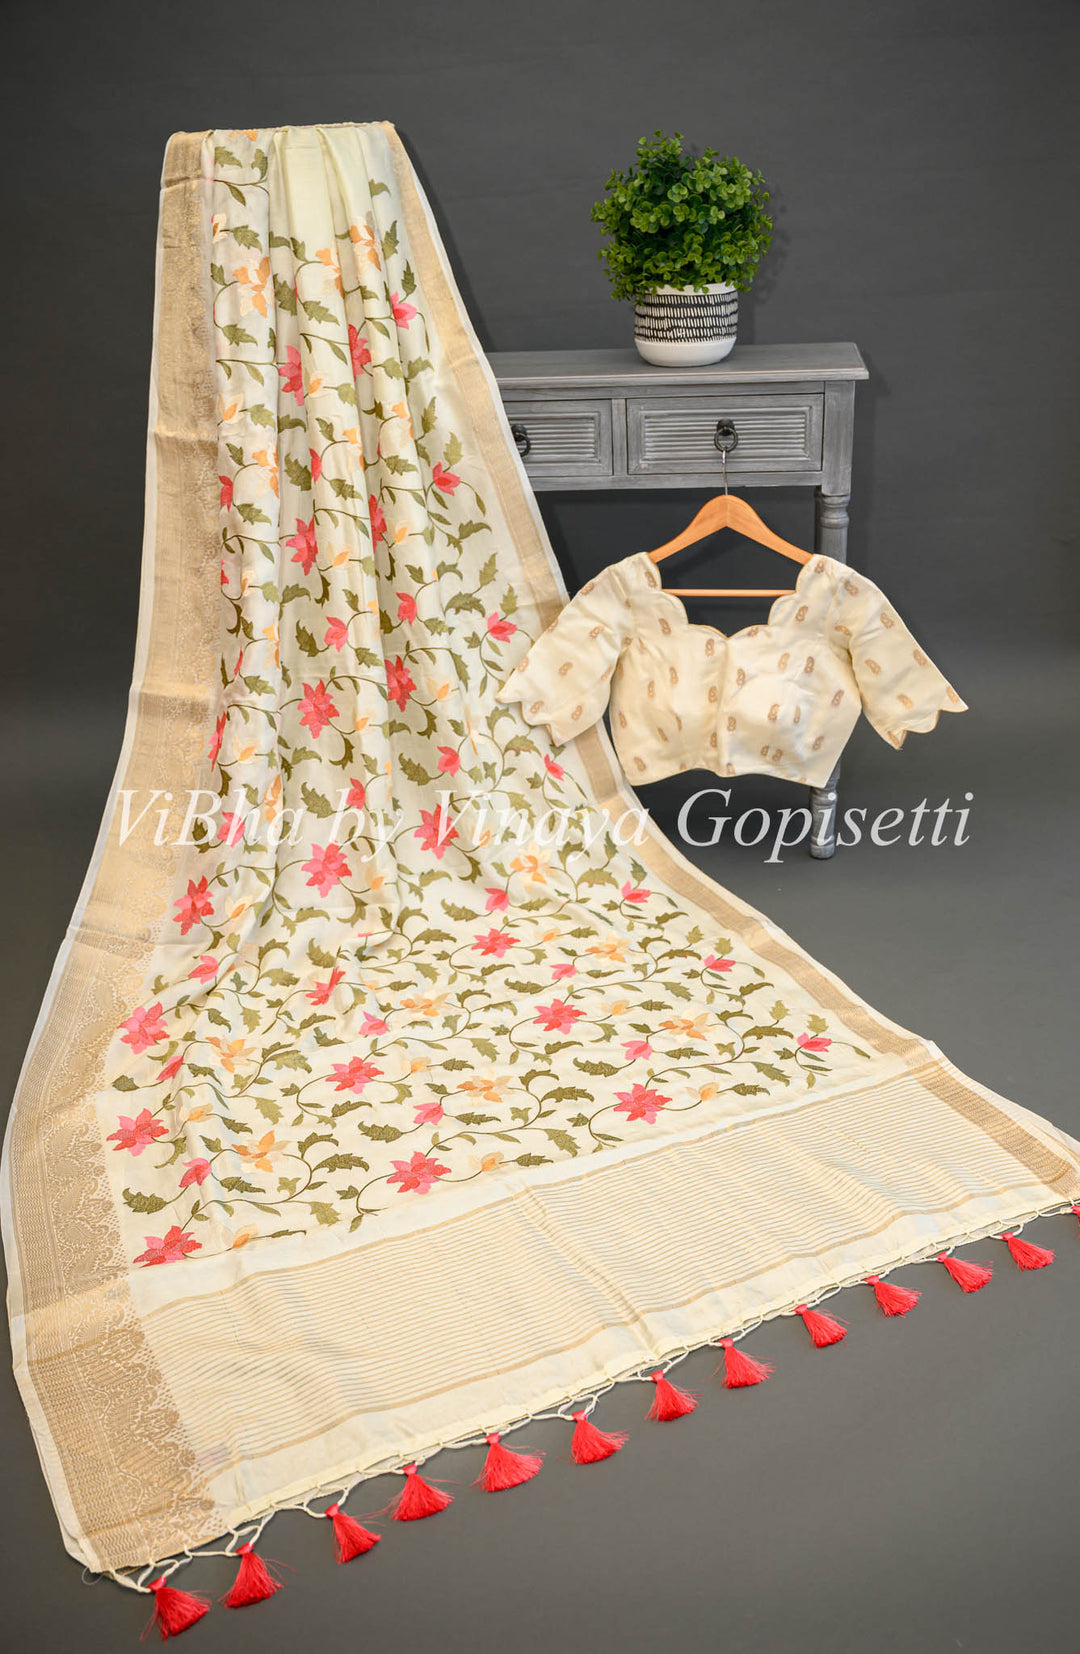 Off -White Banarasi Silk Saree And Blouse With Floral Thread Embroidery.